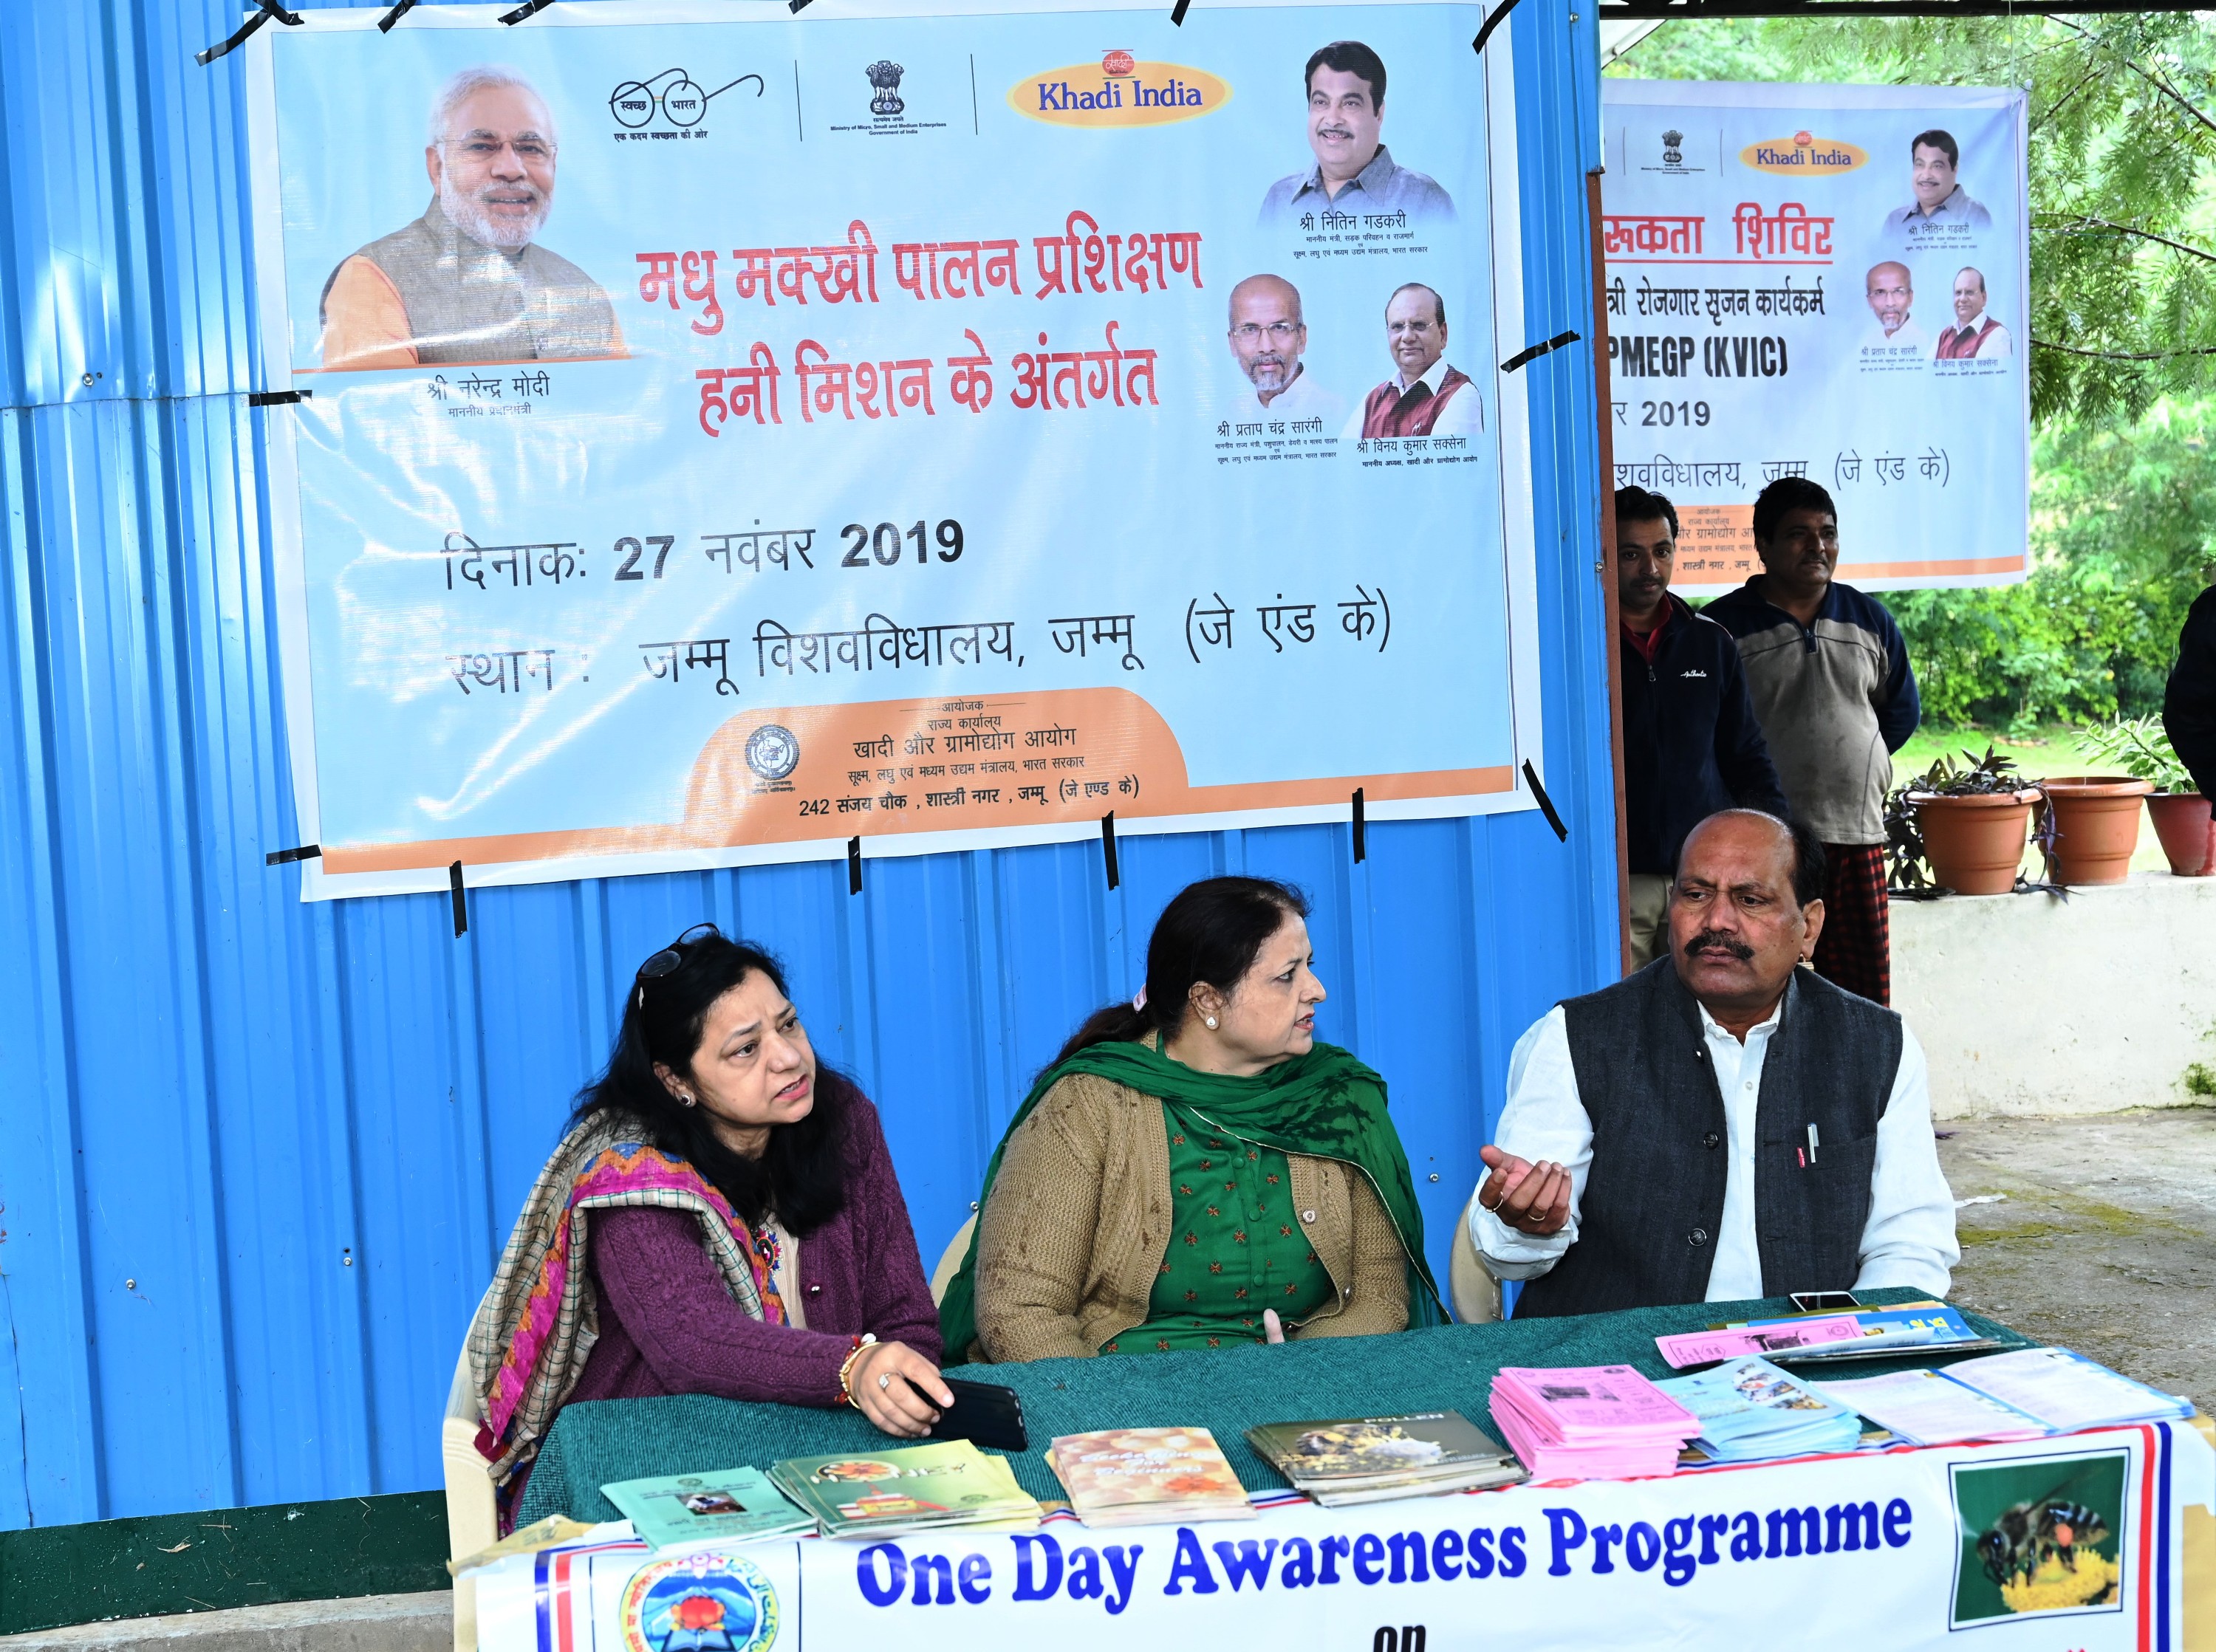 One Day Awareness program in "Skill Development and Entrepreneurship in Apiculture" was organized on 27th November 2019 by the Department of Zoology in collaboration with J&K Khadi and the Village Industries Commission (KVIC).